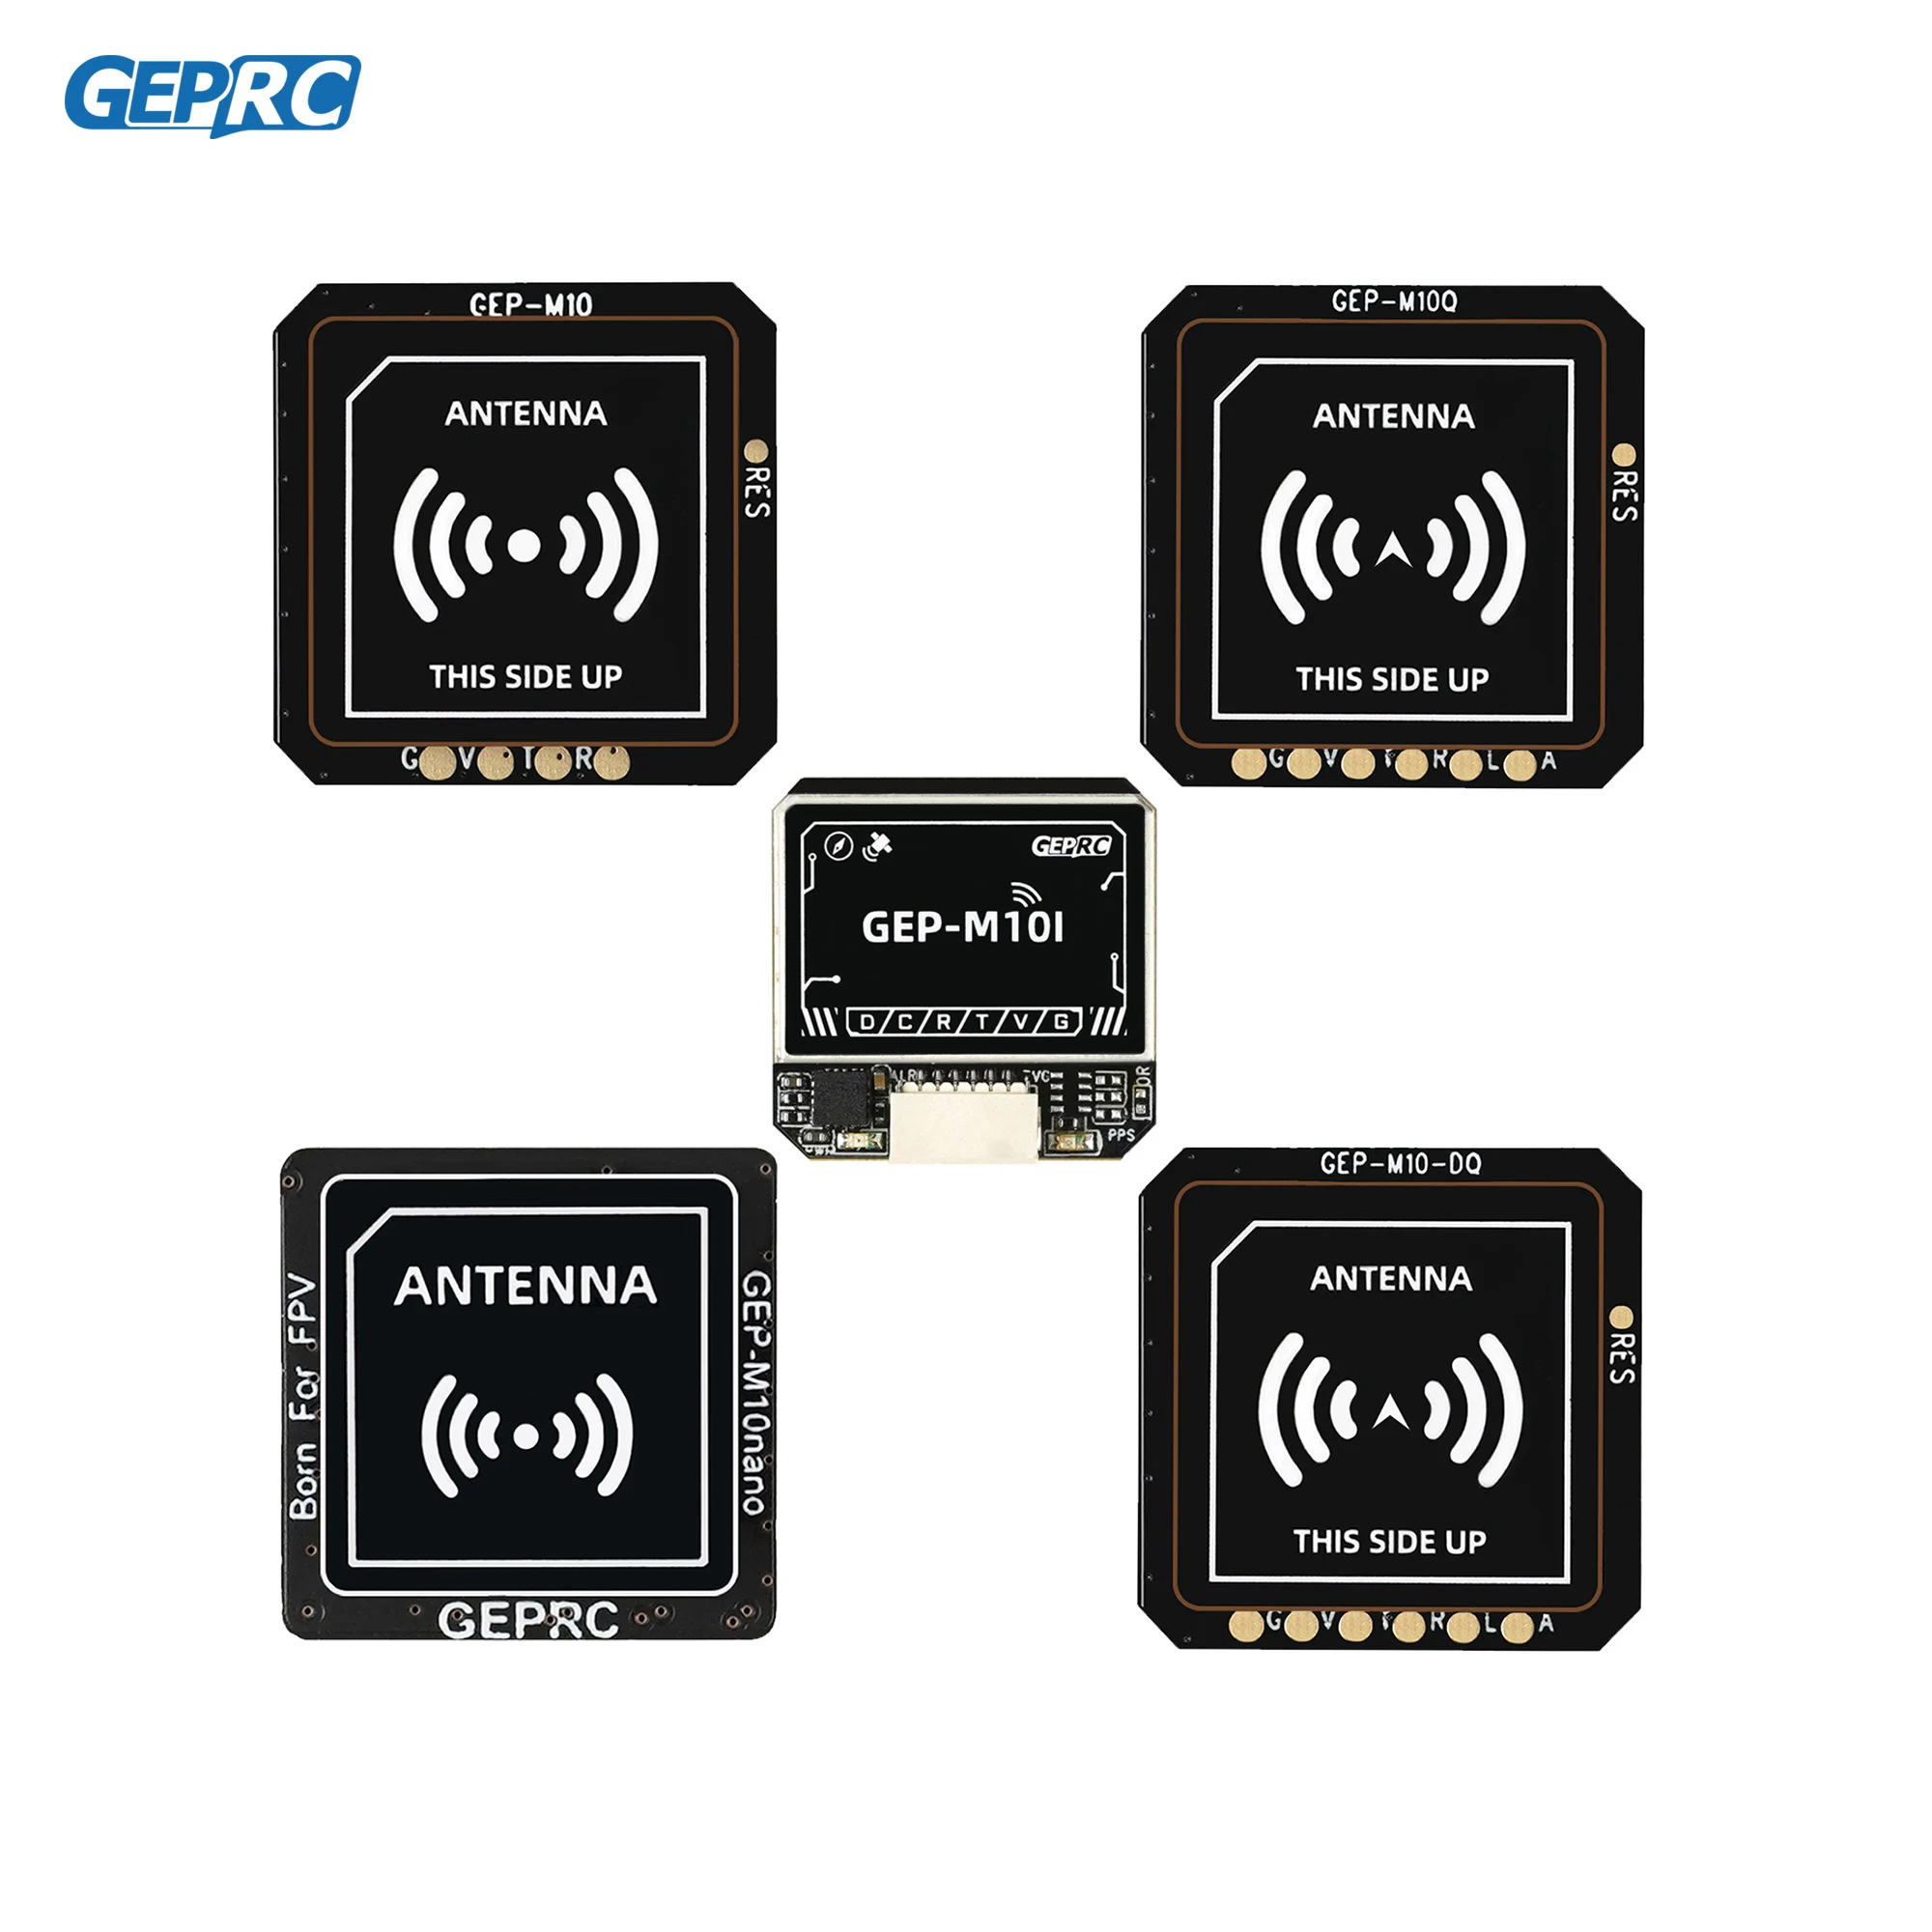 GEPRC GEP-M10 Series GPS Built-in Flash Chip QMC5883L Magnetometer DPS310 Barometer Accurate and Farad Capacitor for FPV Drone